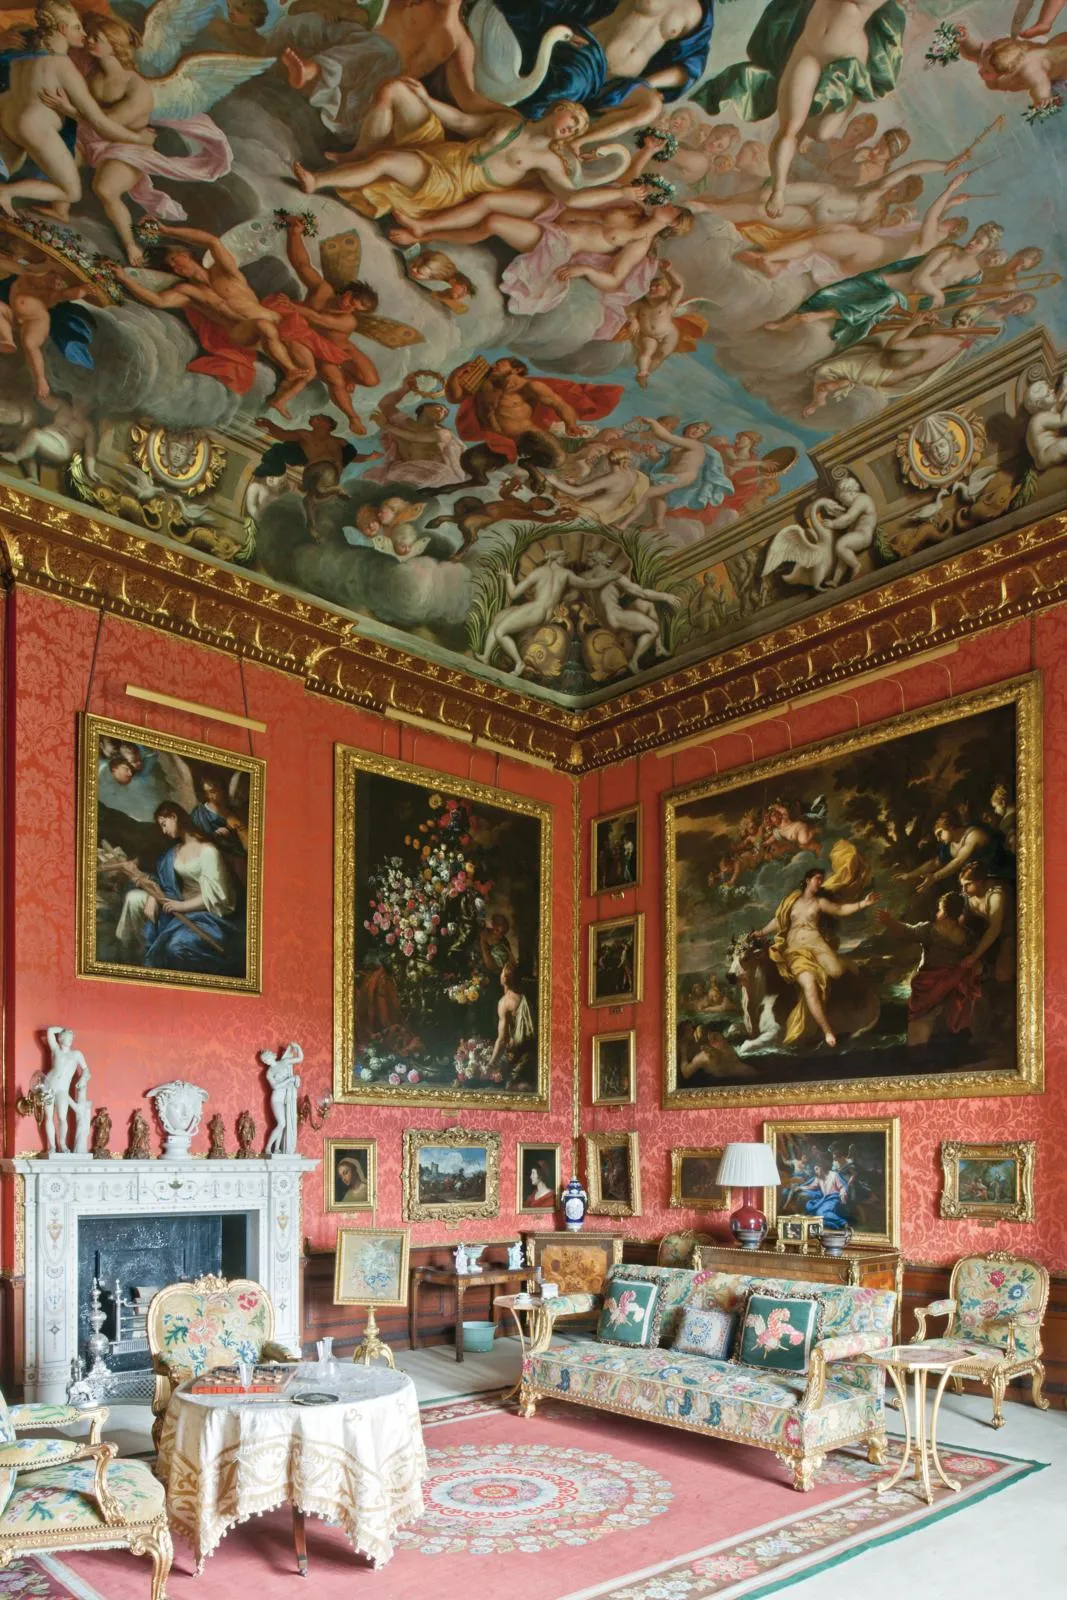 Burghley, the Third George Room.